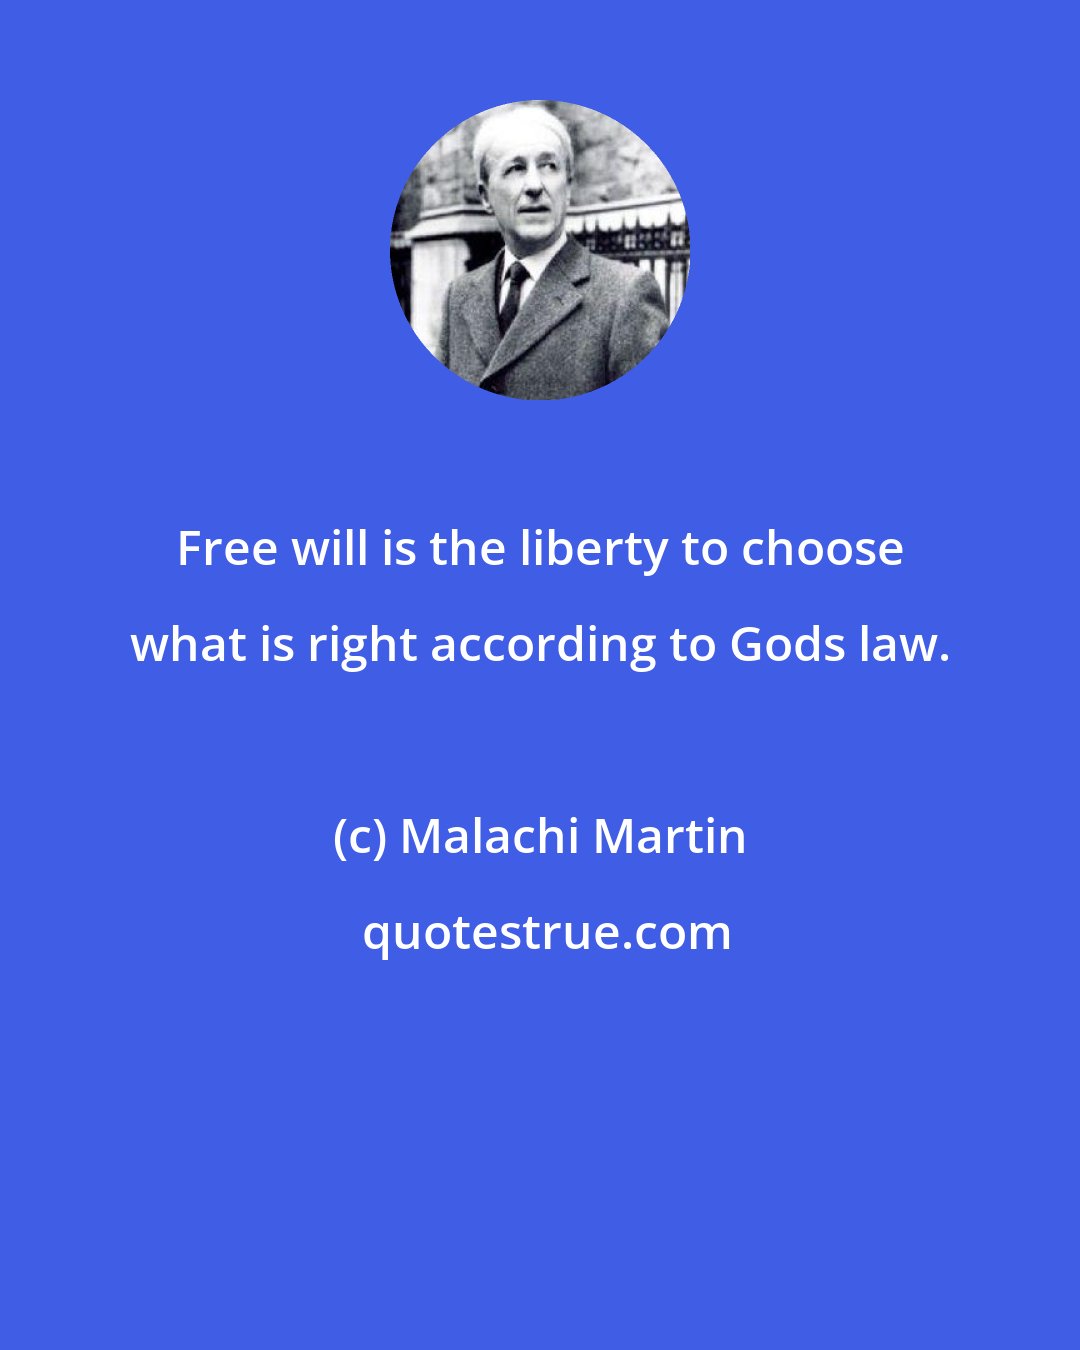 Malachi Martin: Free will is the liberty to choose what is right according to Gods law.